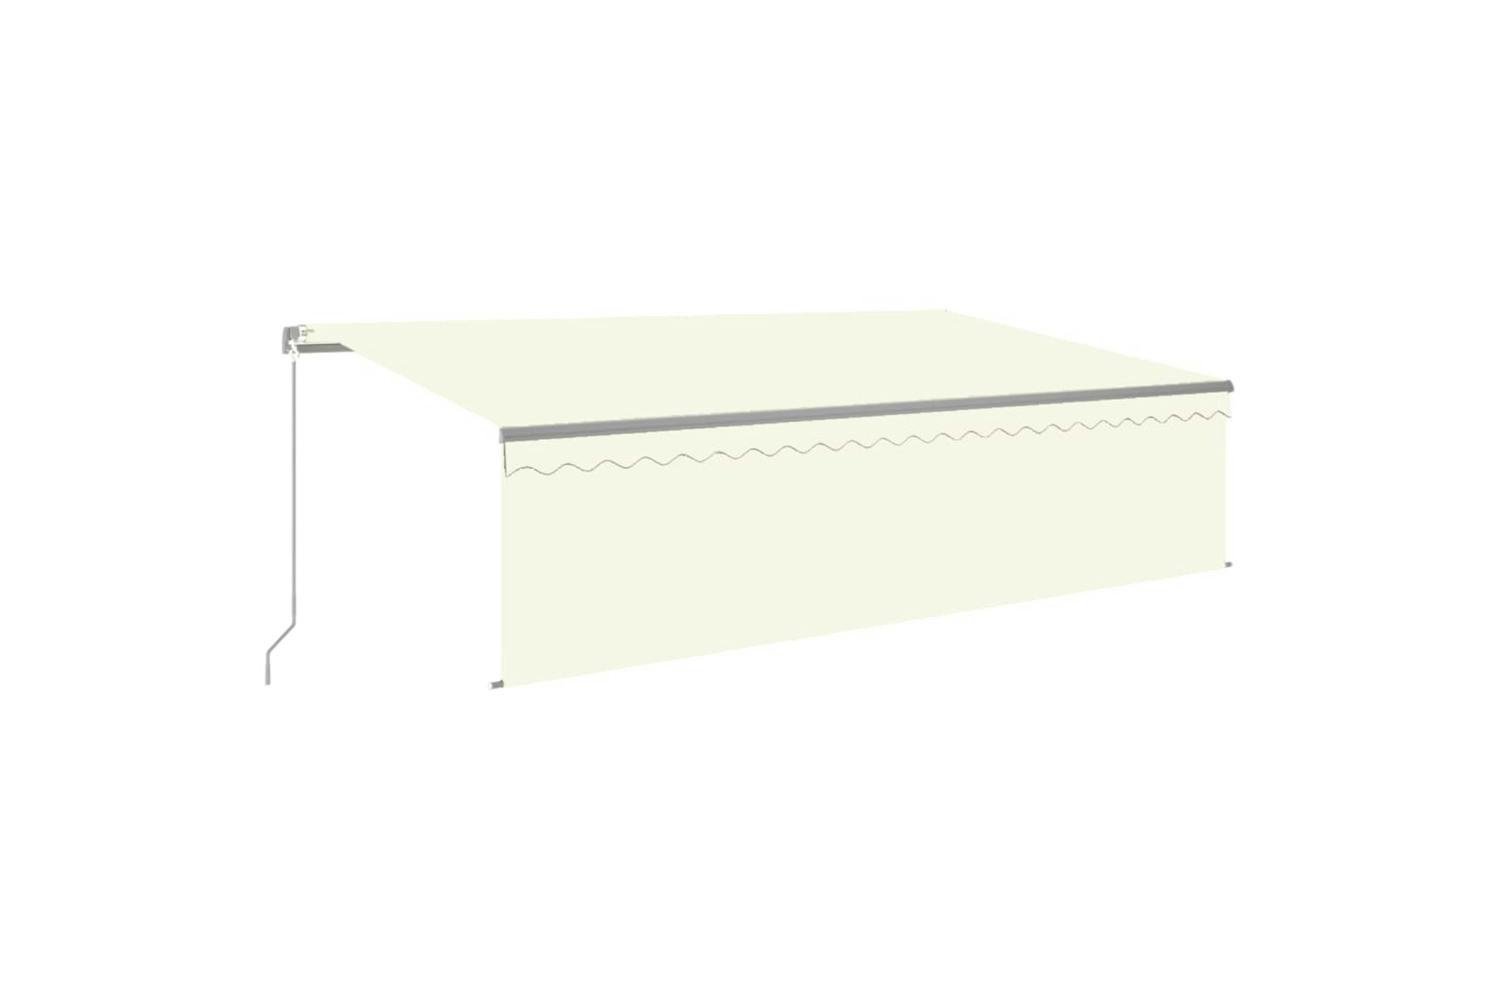 Vidaxl 3069457 Manual Retractable Awning With Blind 5x3m Cream